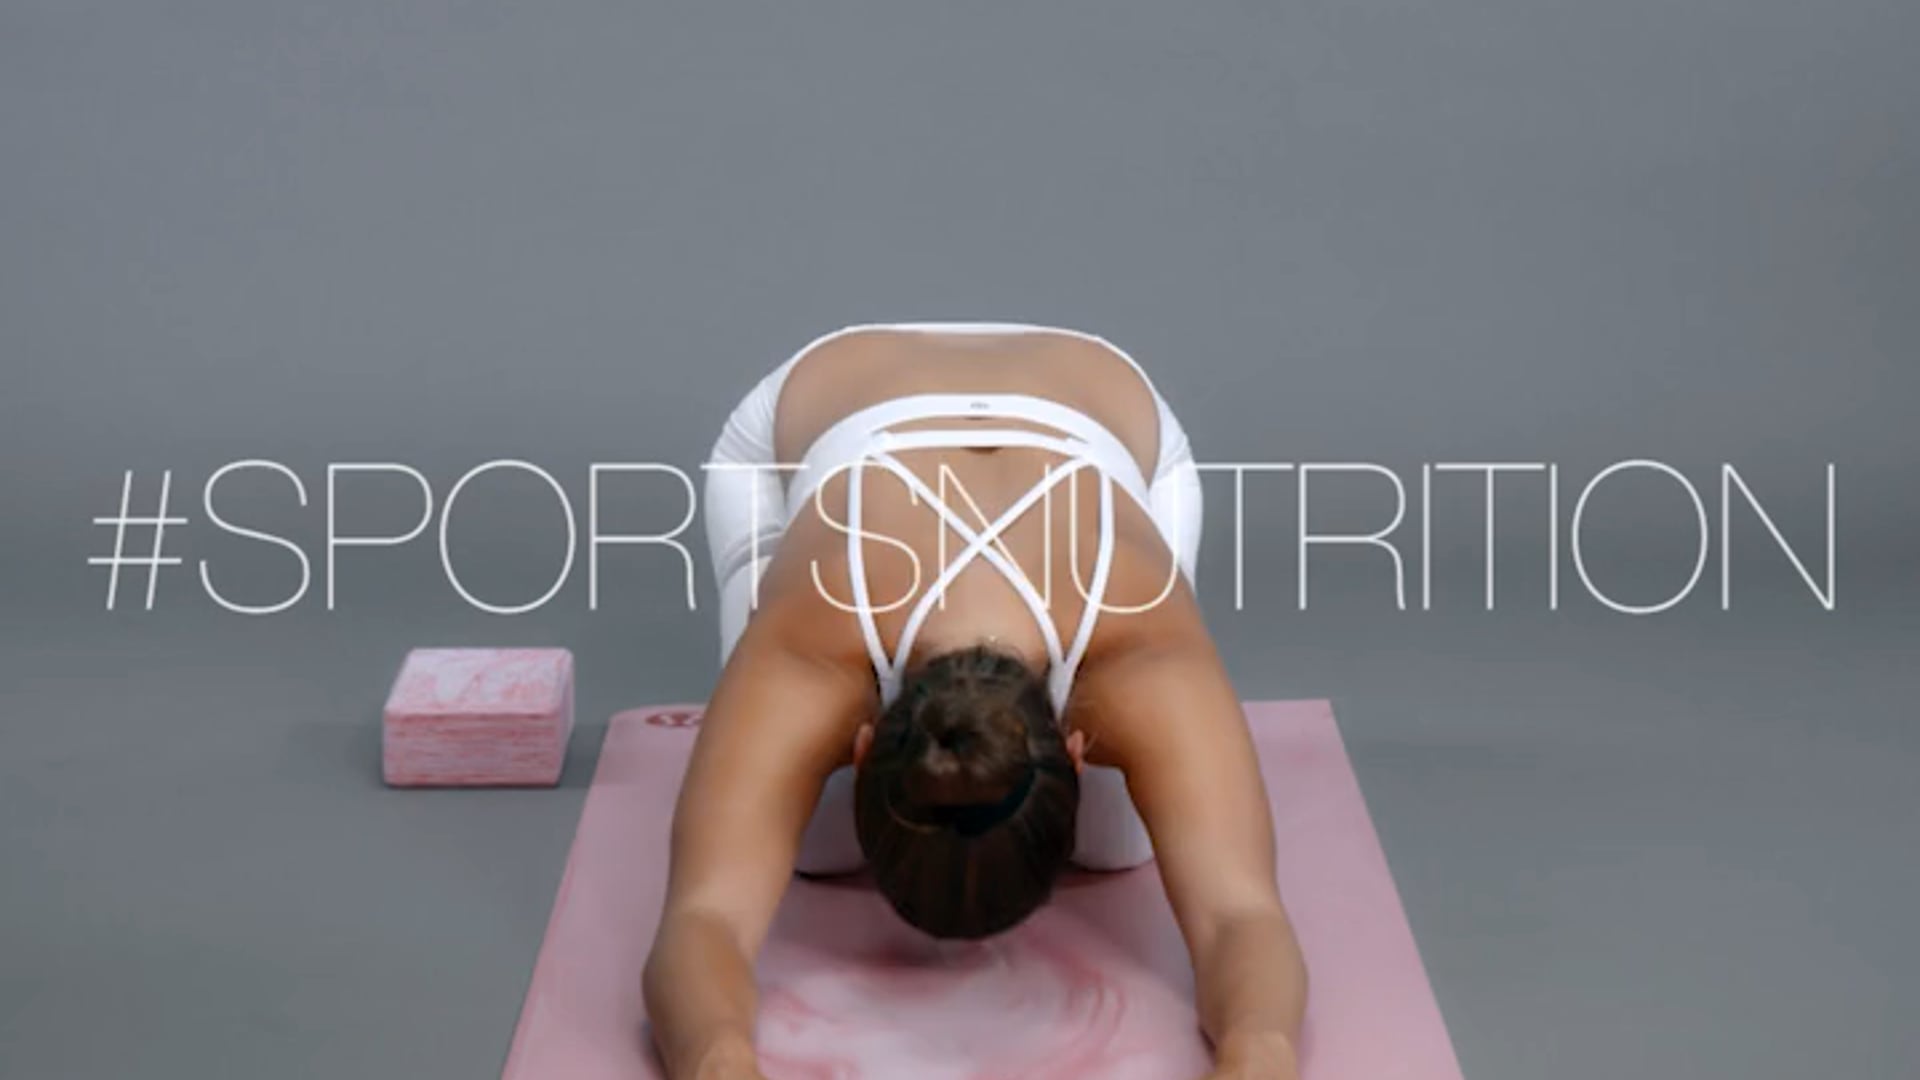 Miele AG | Mindfulness Pre-Workout - Social Content